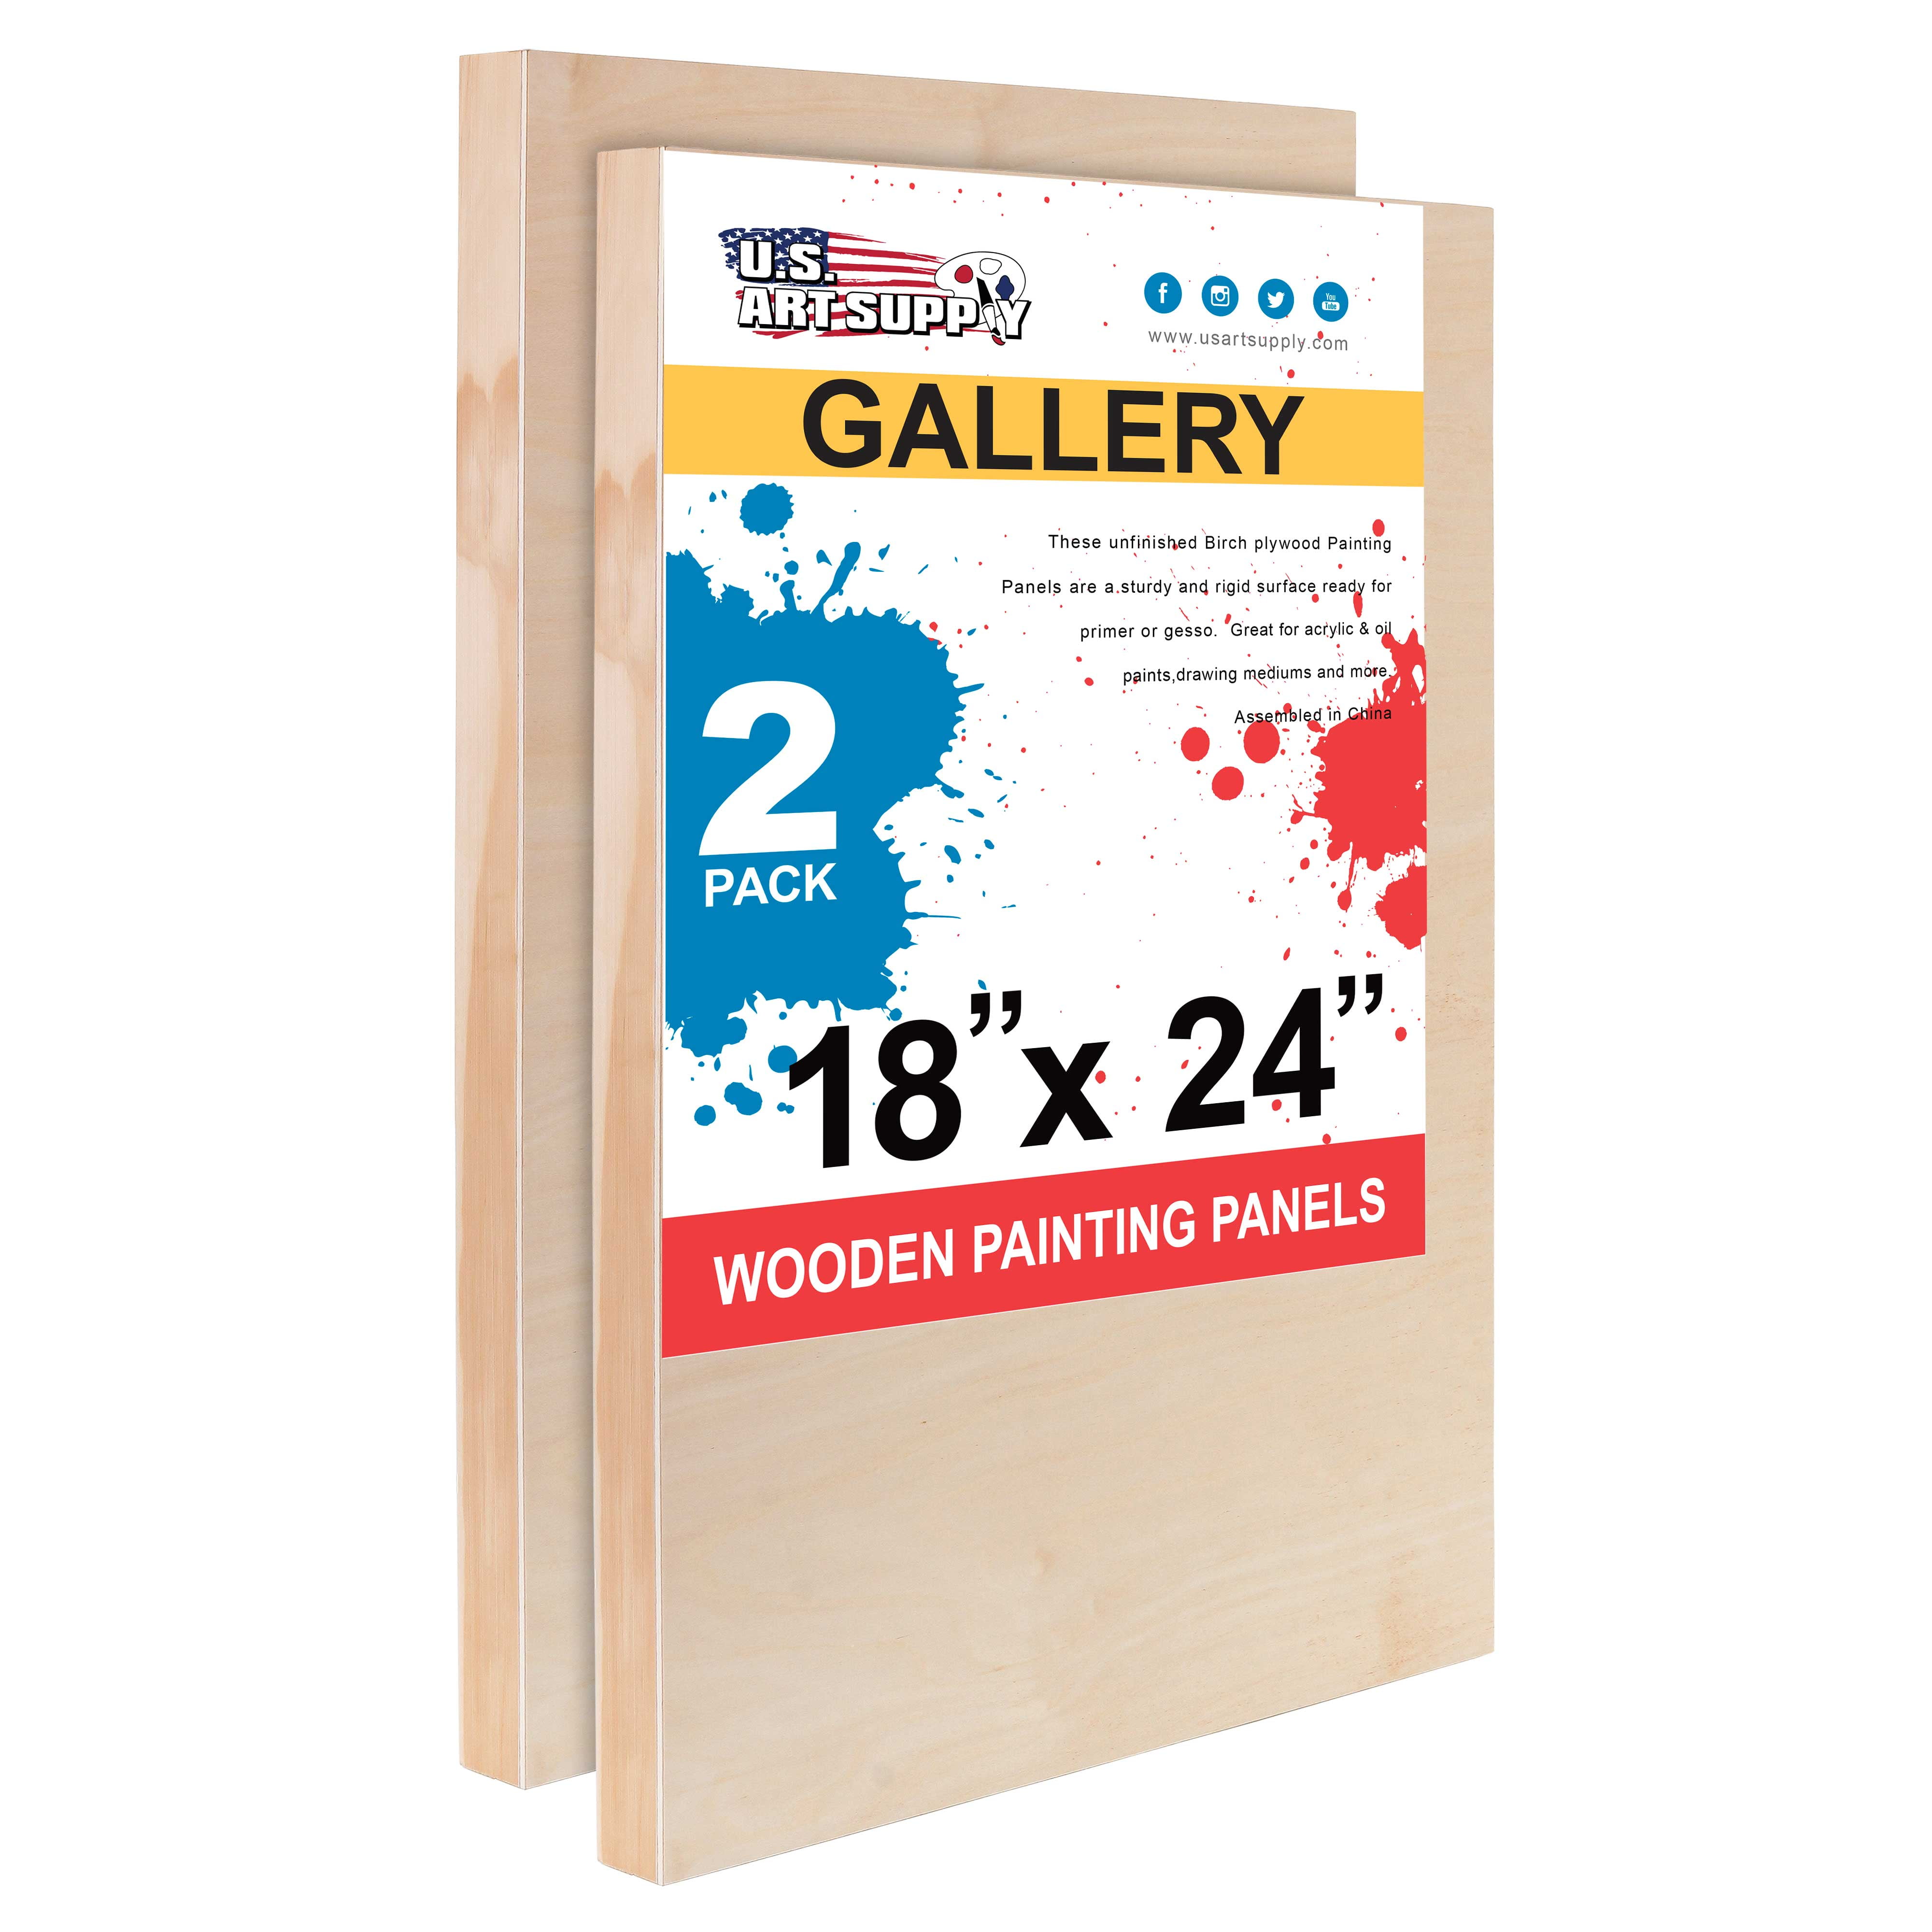 Art & Craft Dedoot 4.7x4.7 Unfinished Birch Wood Paint Pouring Panel Boards Wood Painting Boards 0.2 Deep Cradle Square Wood Canvas Boards for Painting 